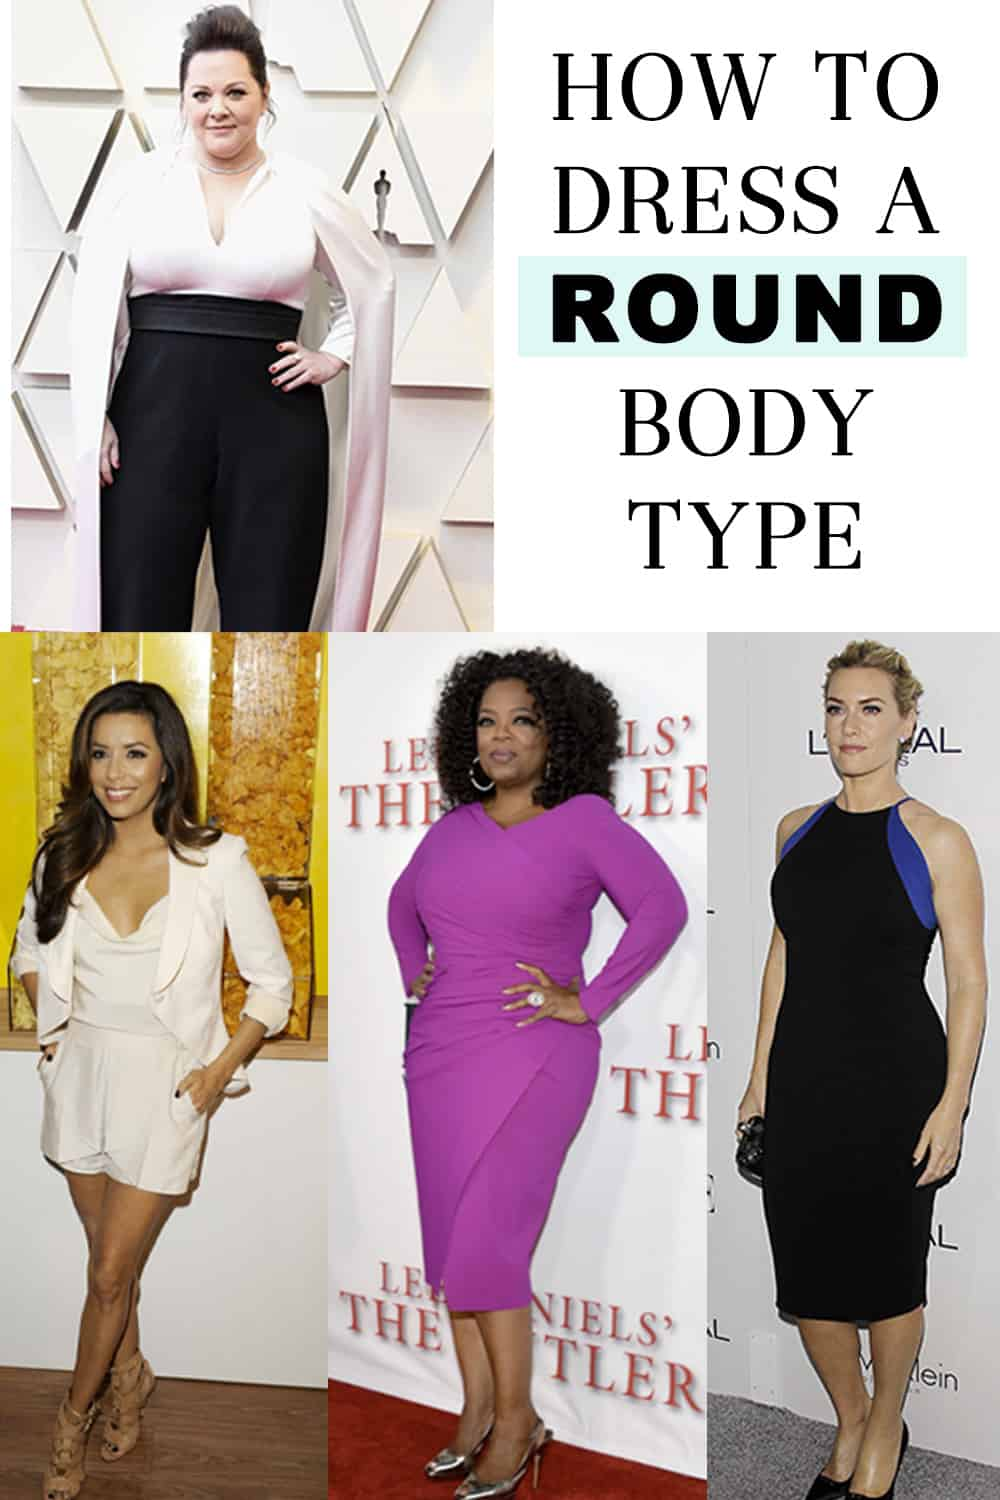 How to Dress a Round Body Type